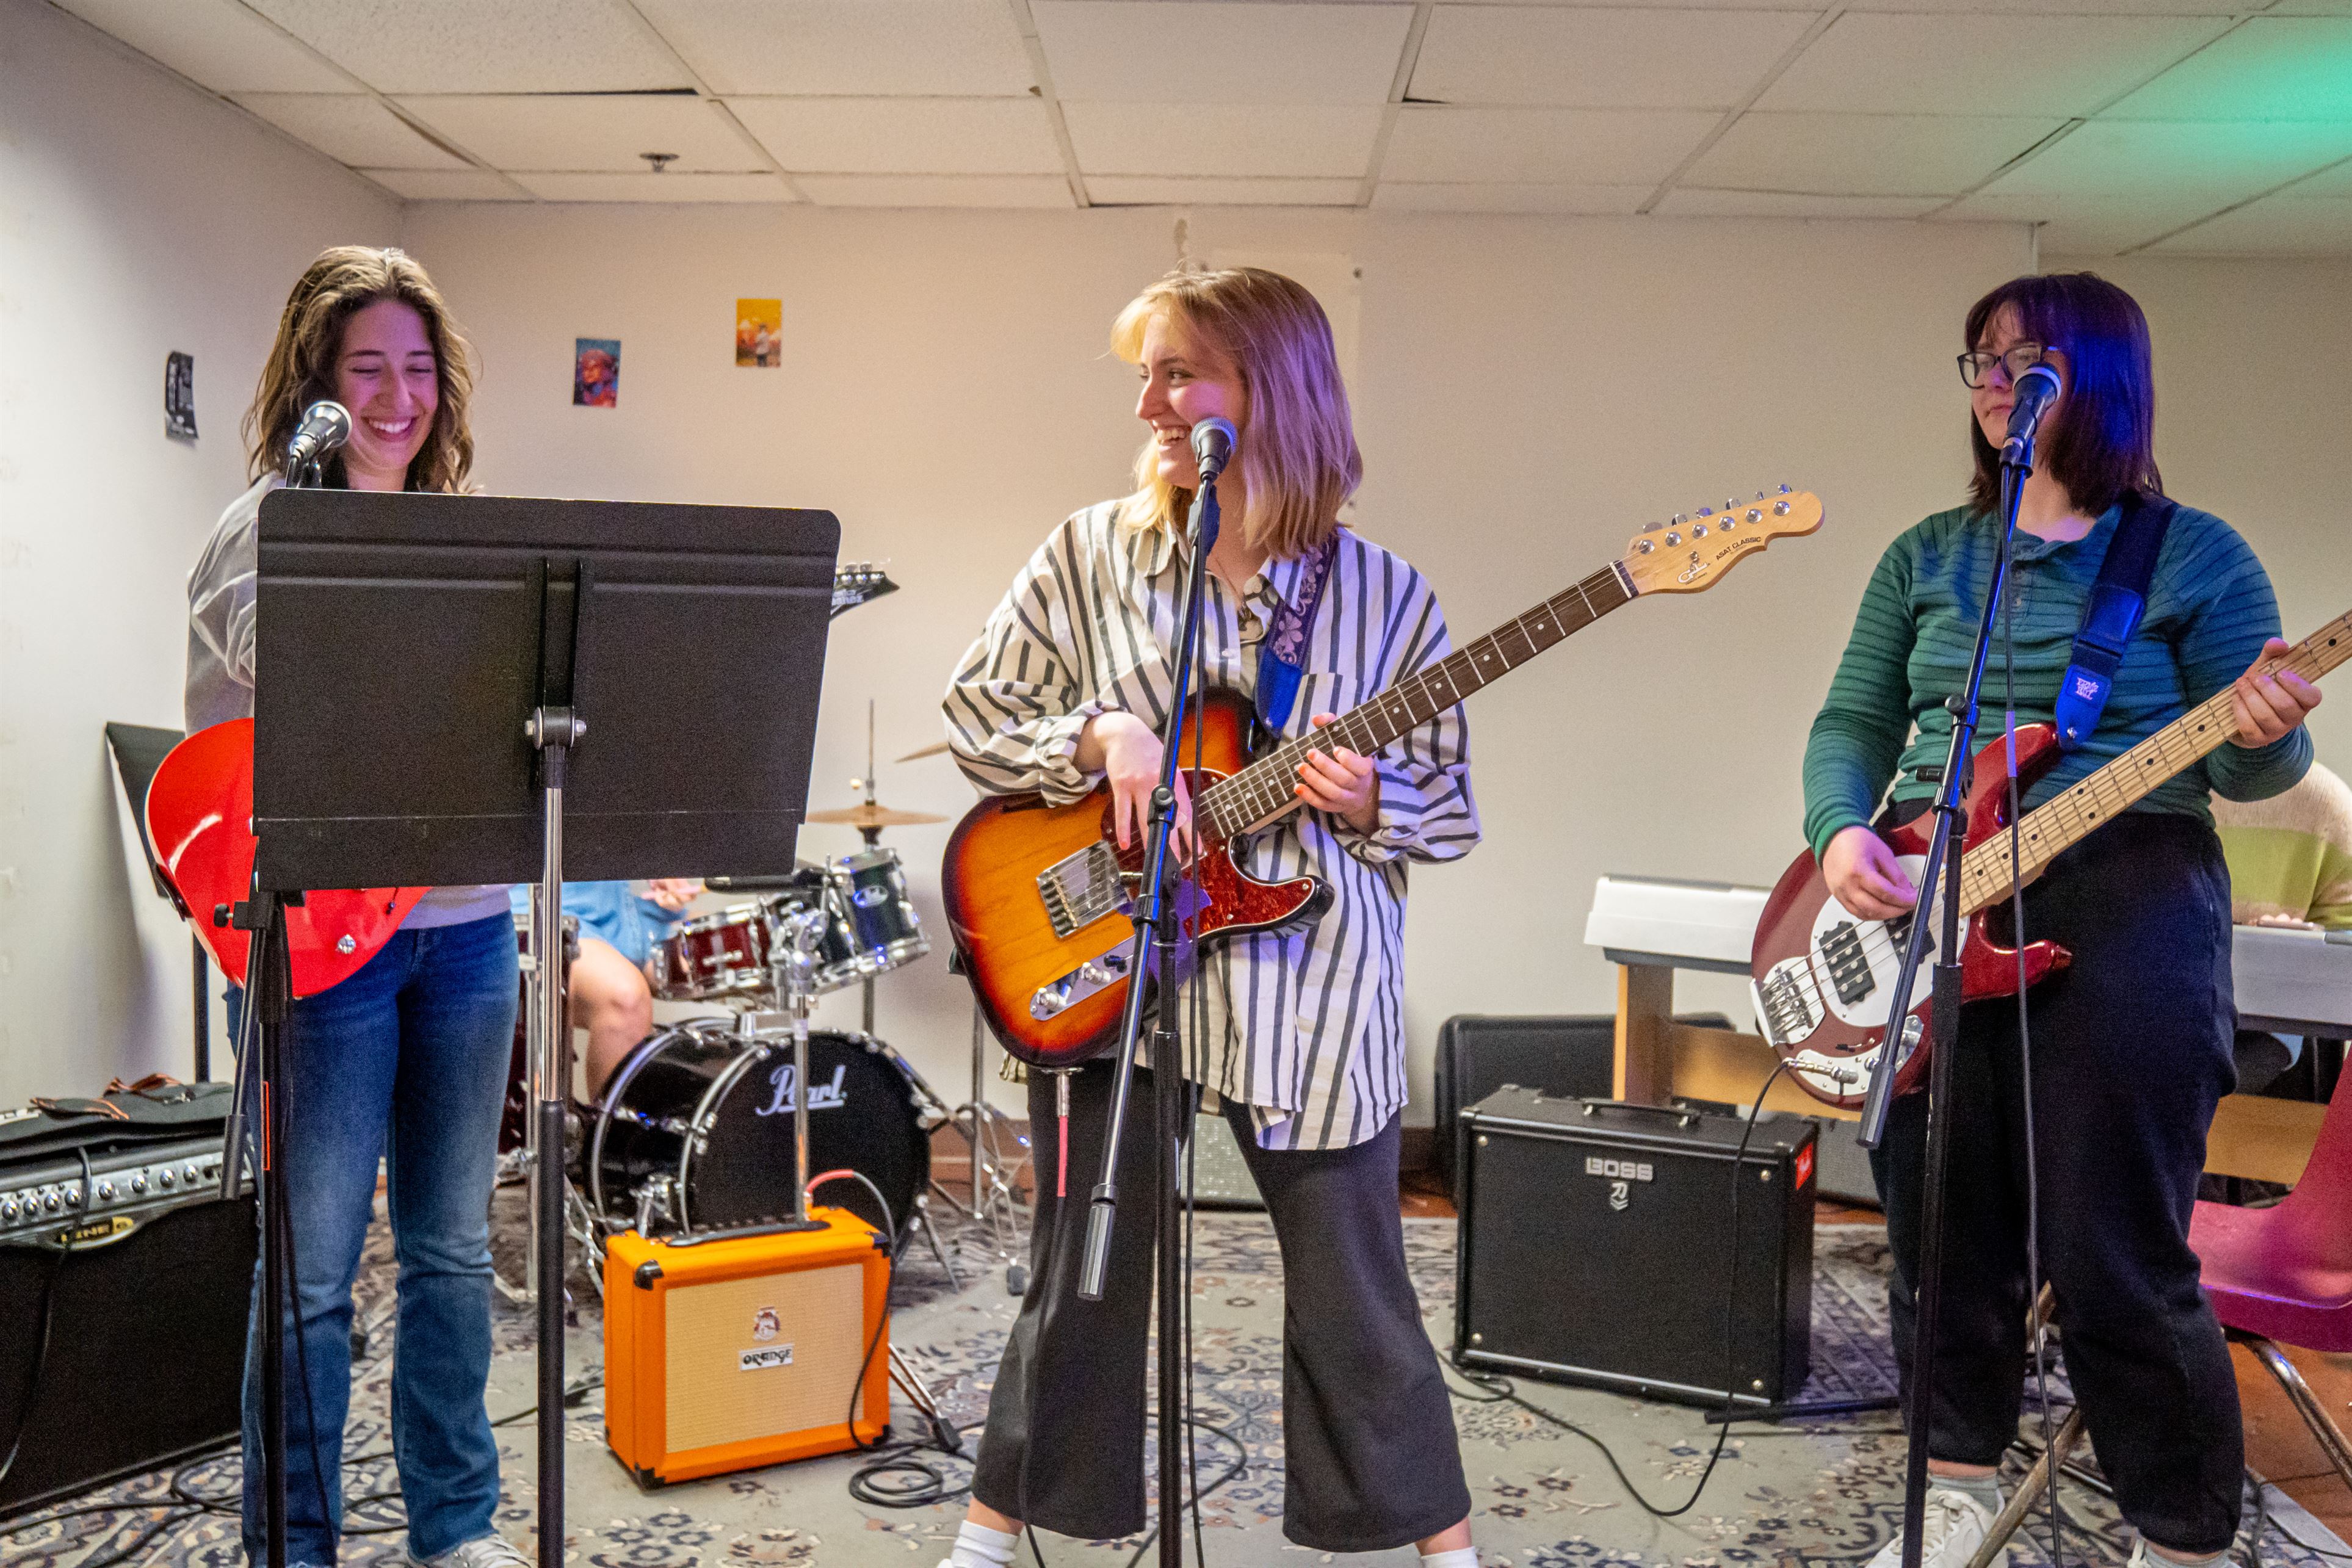 From left to right, Alexa Tabbacchino, a junior recording arts and production major, Melissa Hughes, a senior music education major, and Christine Tanko, a junior music education major, play their instruments together. 
Lynise Olivacce | The Montclarion